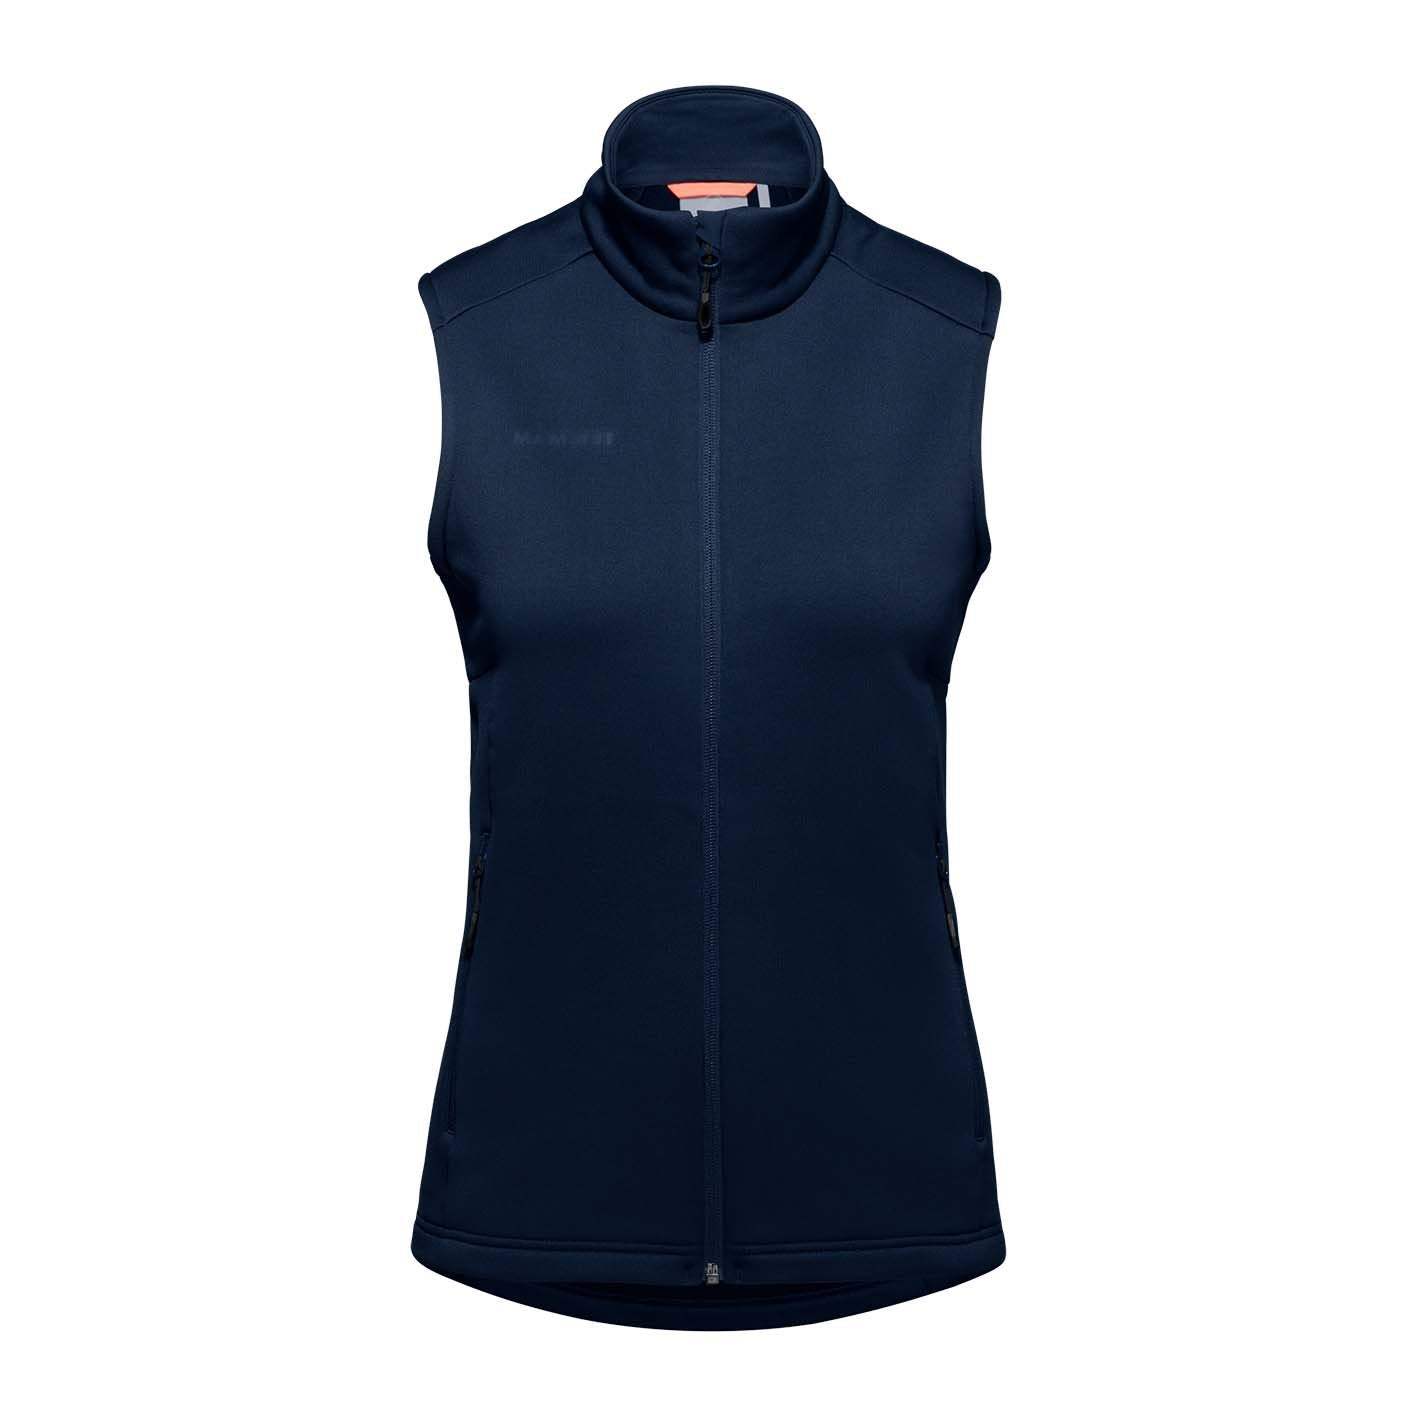 Women's Corporate ML Vest by Mammut - The Luxury Promotional Gifts Company Limited